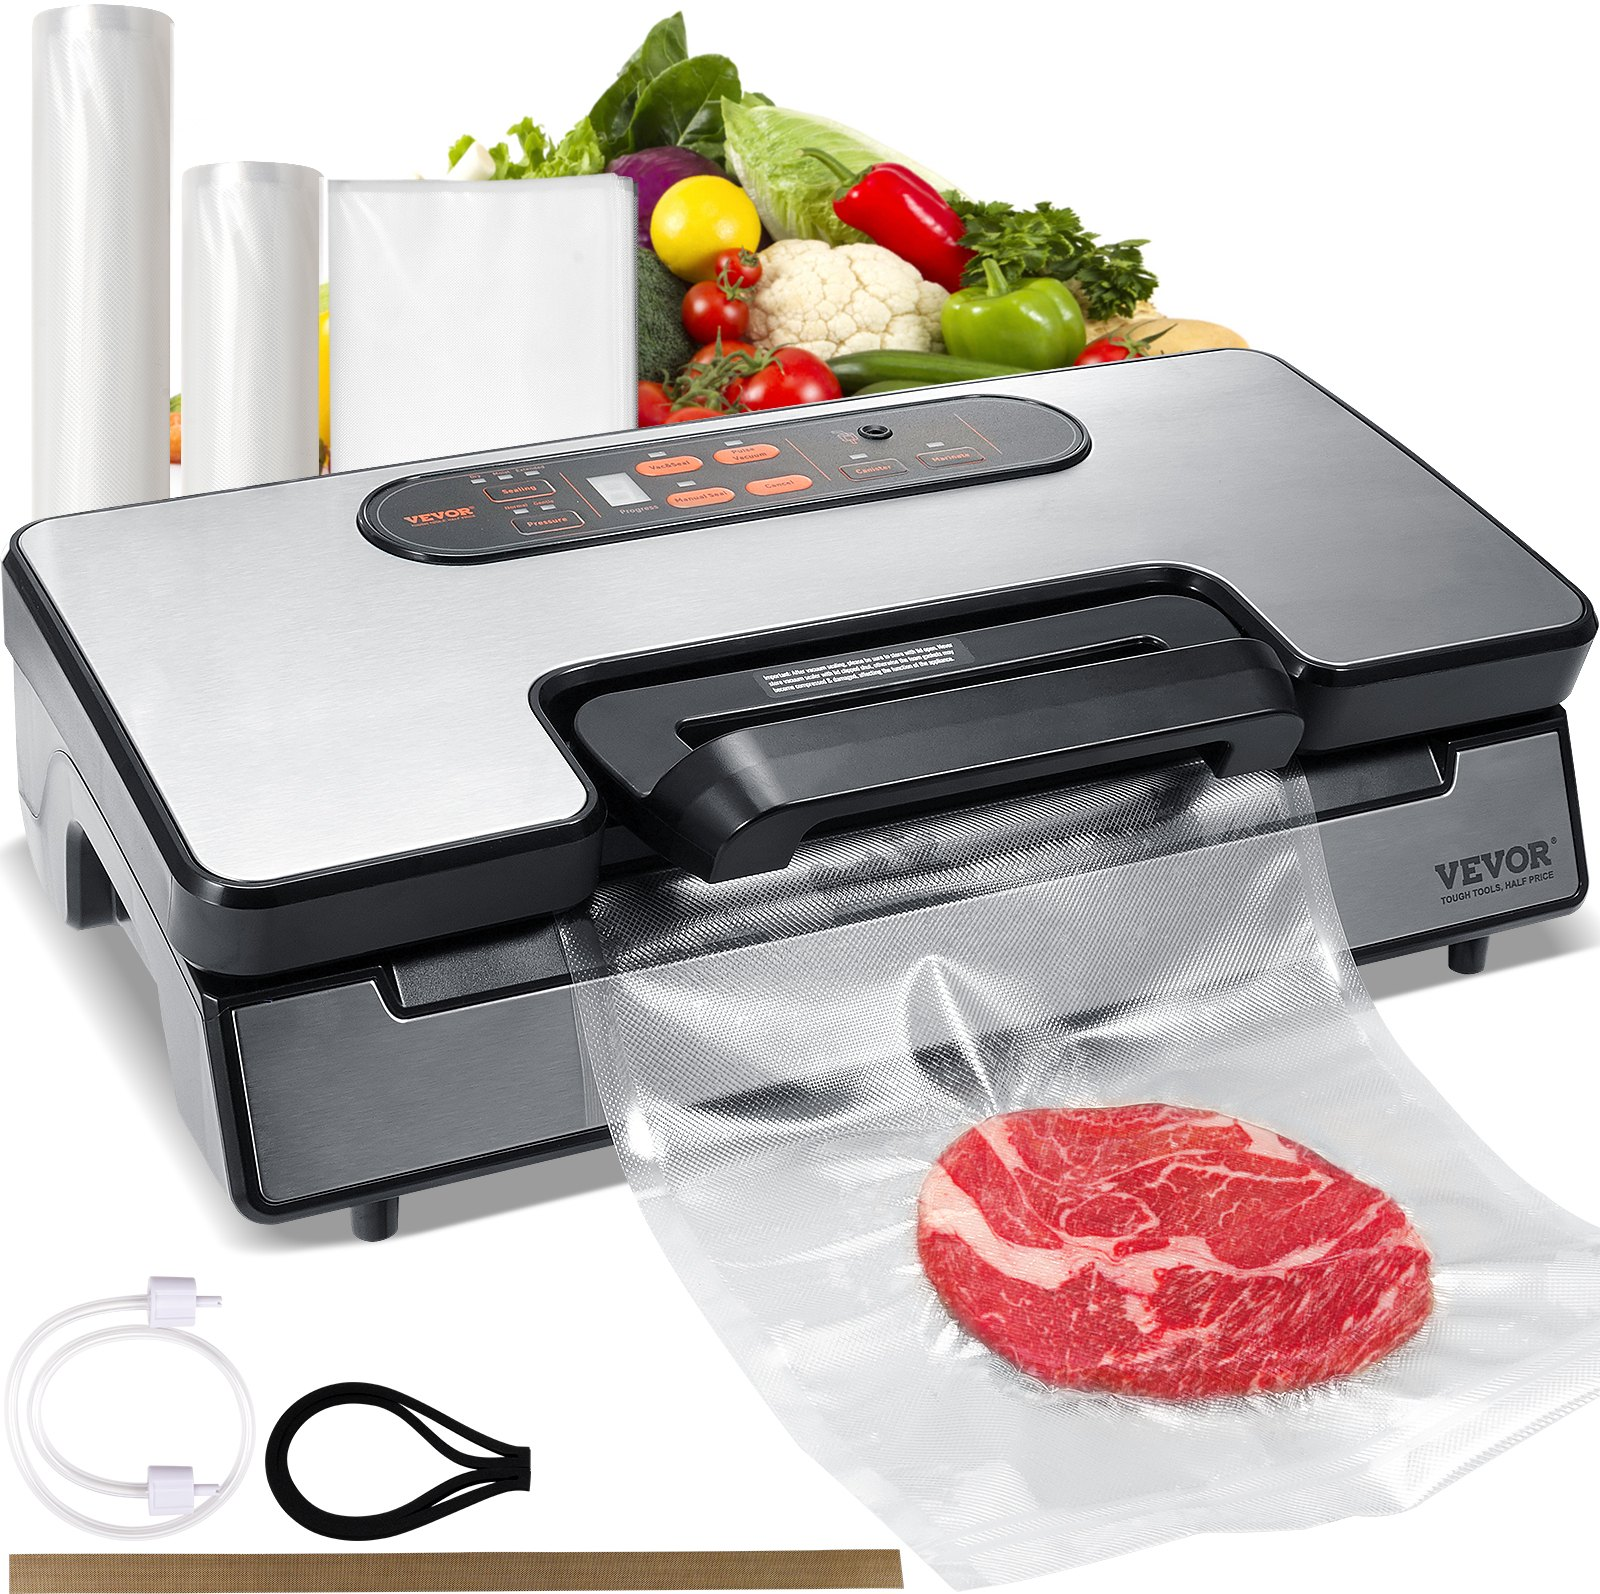 VEVOR Vacuum Sealer Machine, 90Kpa 130W Powerful Dual Pump and Dual Sealing, Dry and Moist Food Storage, Automatic and Manual Air Sealing System with Built-in Cutter, with Seal Bag and External Hose, Goodies N Stuff